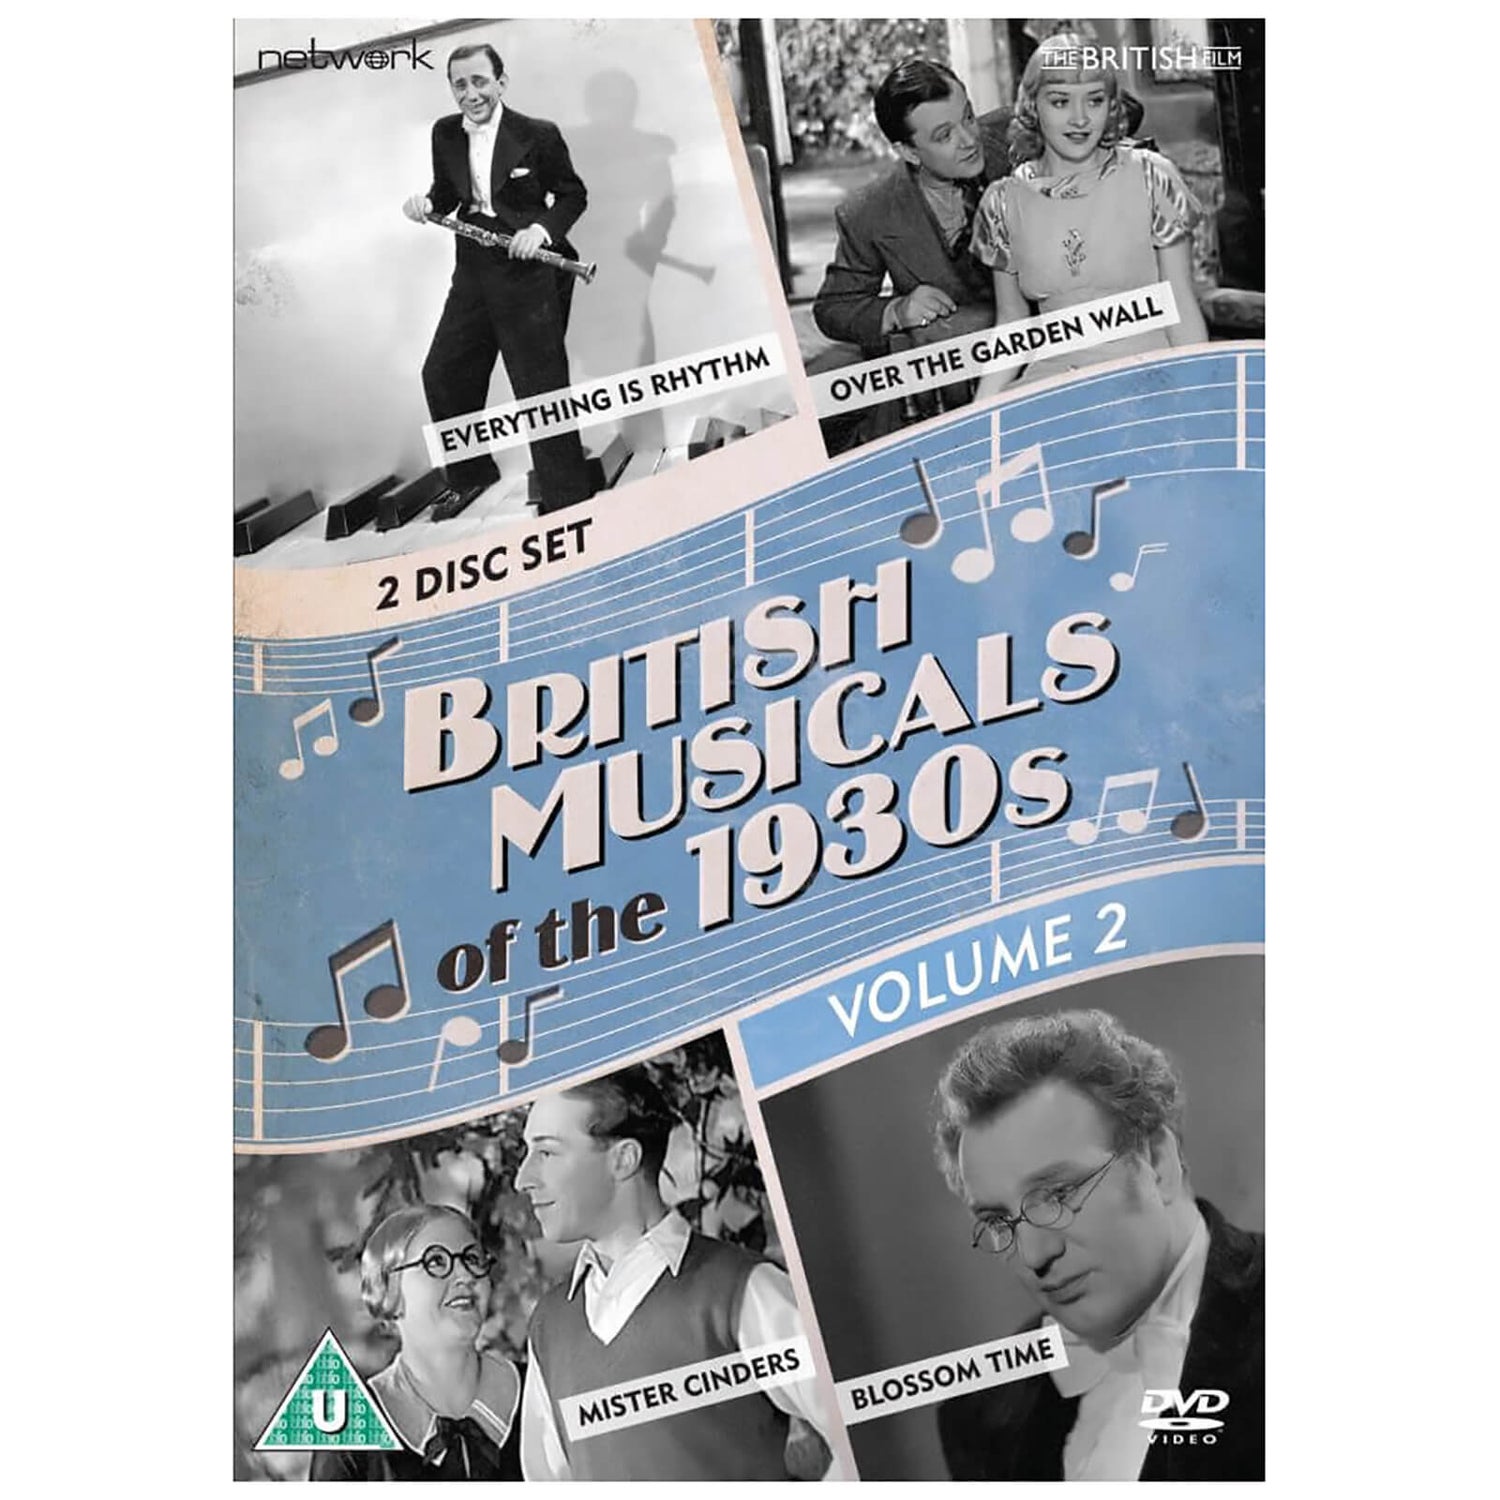 British Musicals of 1930s - Volume Two: Blossom Time / Over Garden Wall / Mister Cinders / Everthing is Rhythm